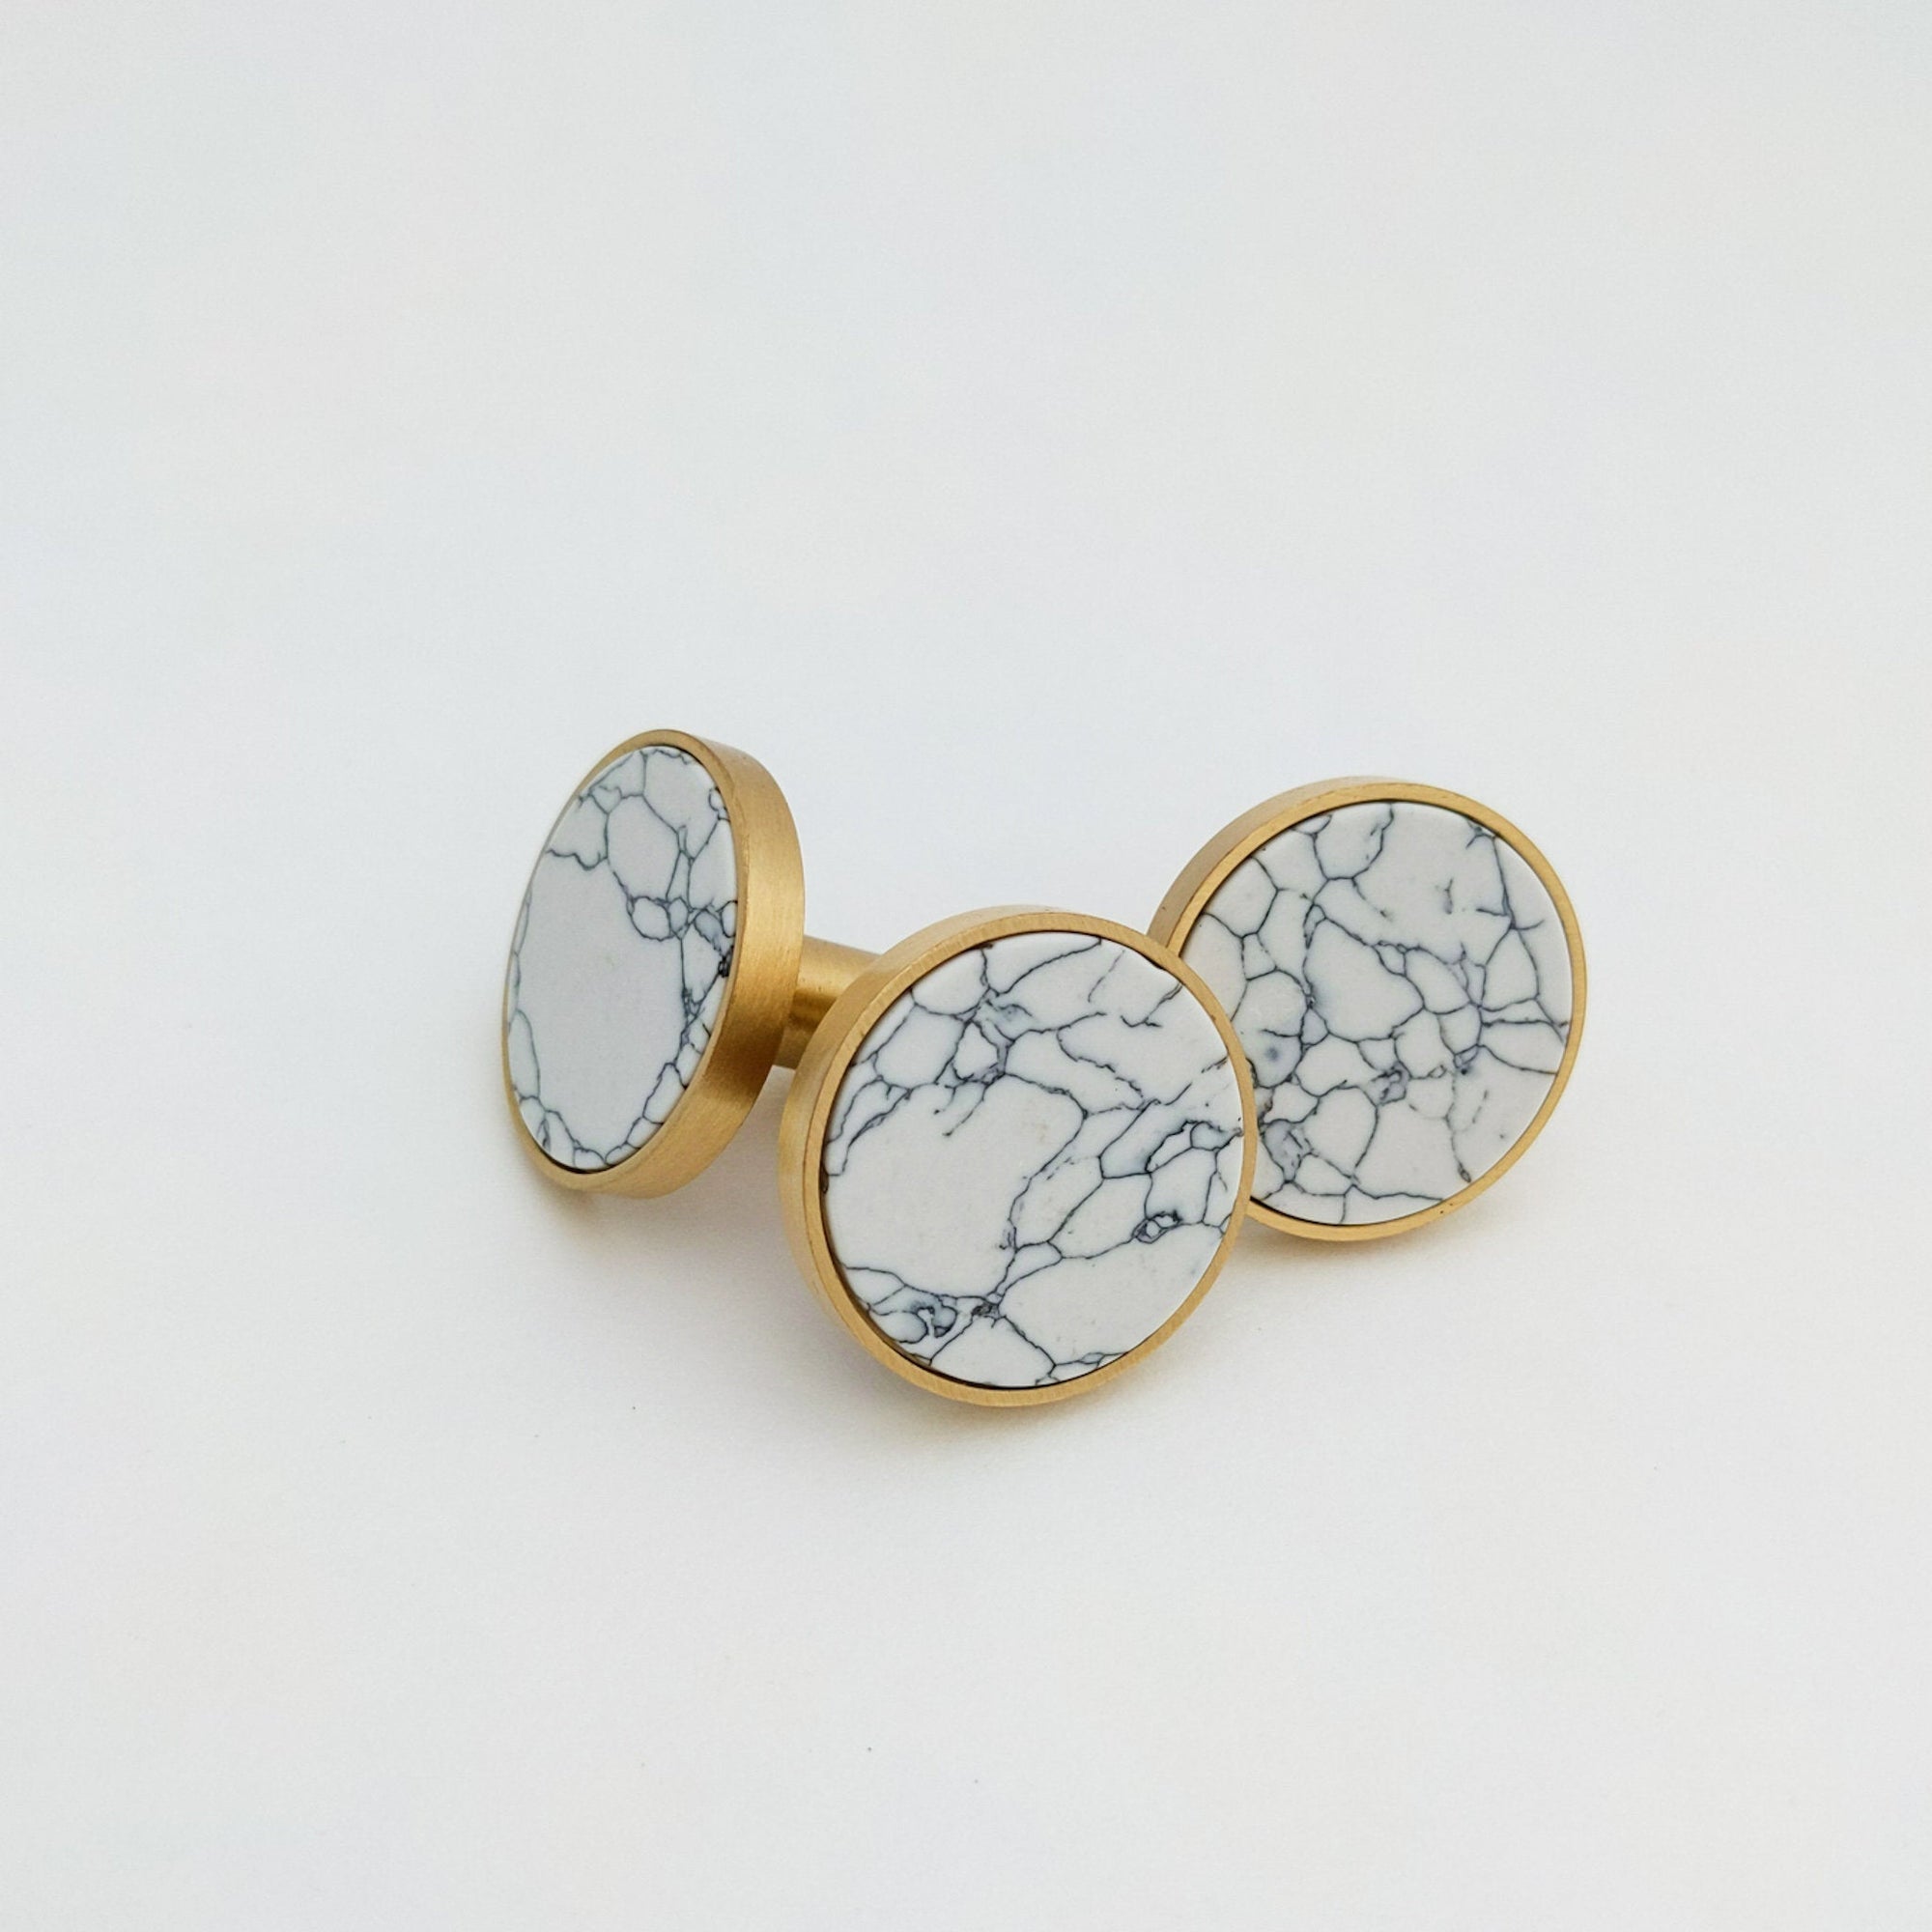 Modern Marble Knob - Round White + Black Marble Stone -  Gold Accent - Unique Drawer Pulls, Cabinet Knobs and Pulls, Unique, Decorative